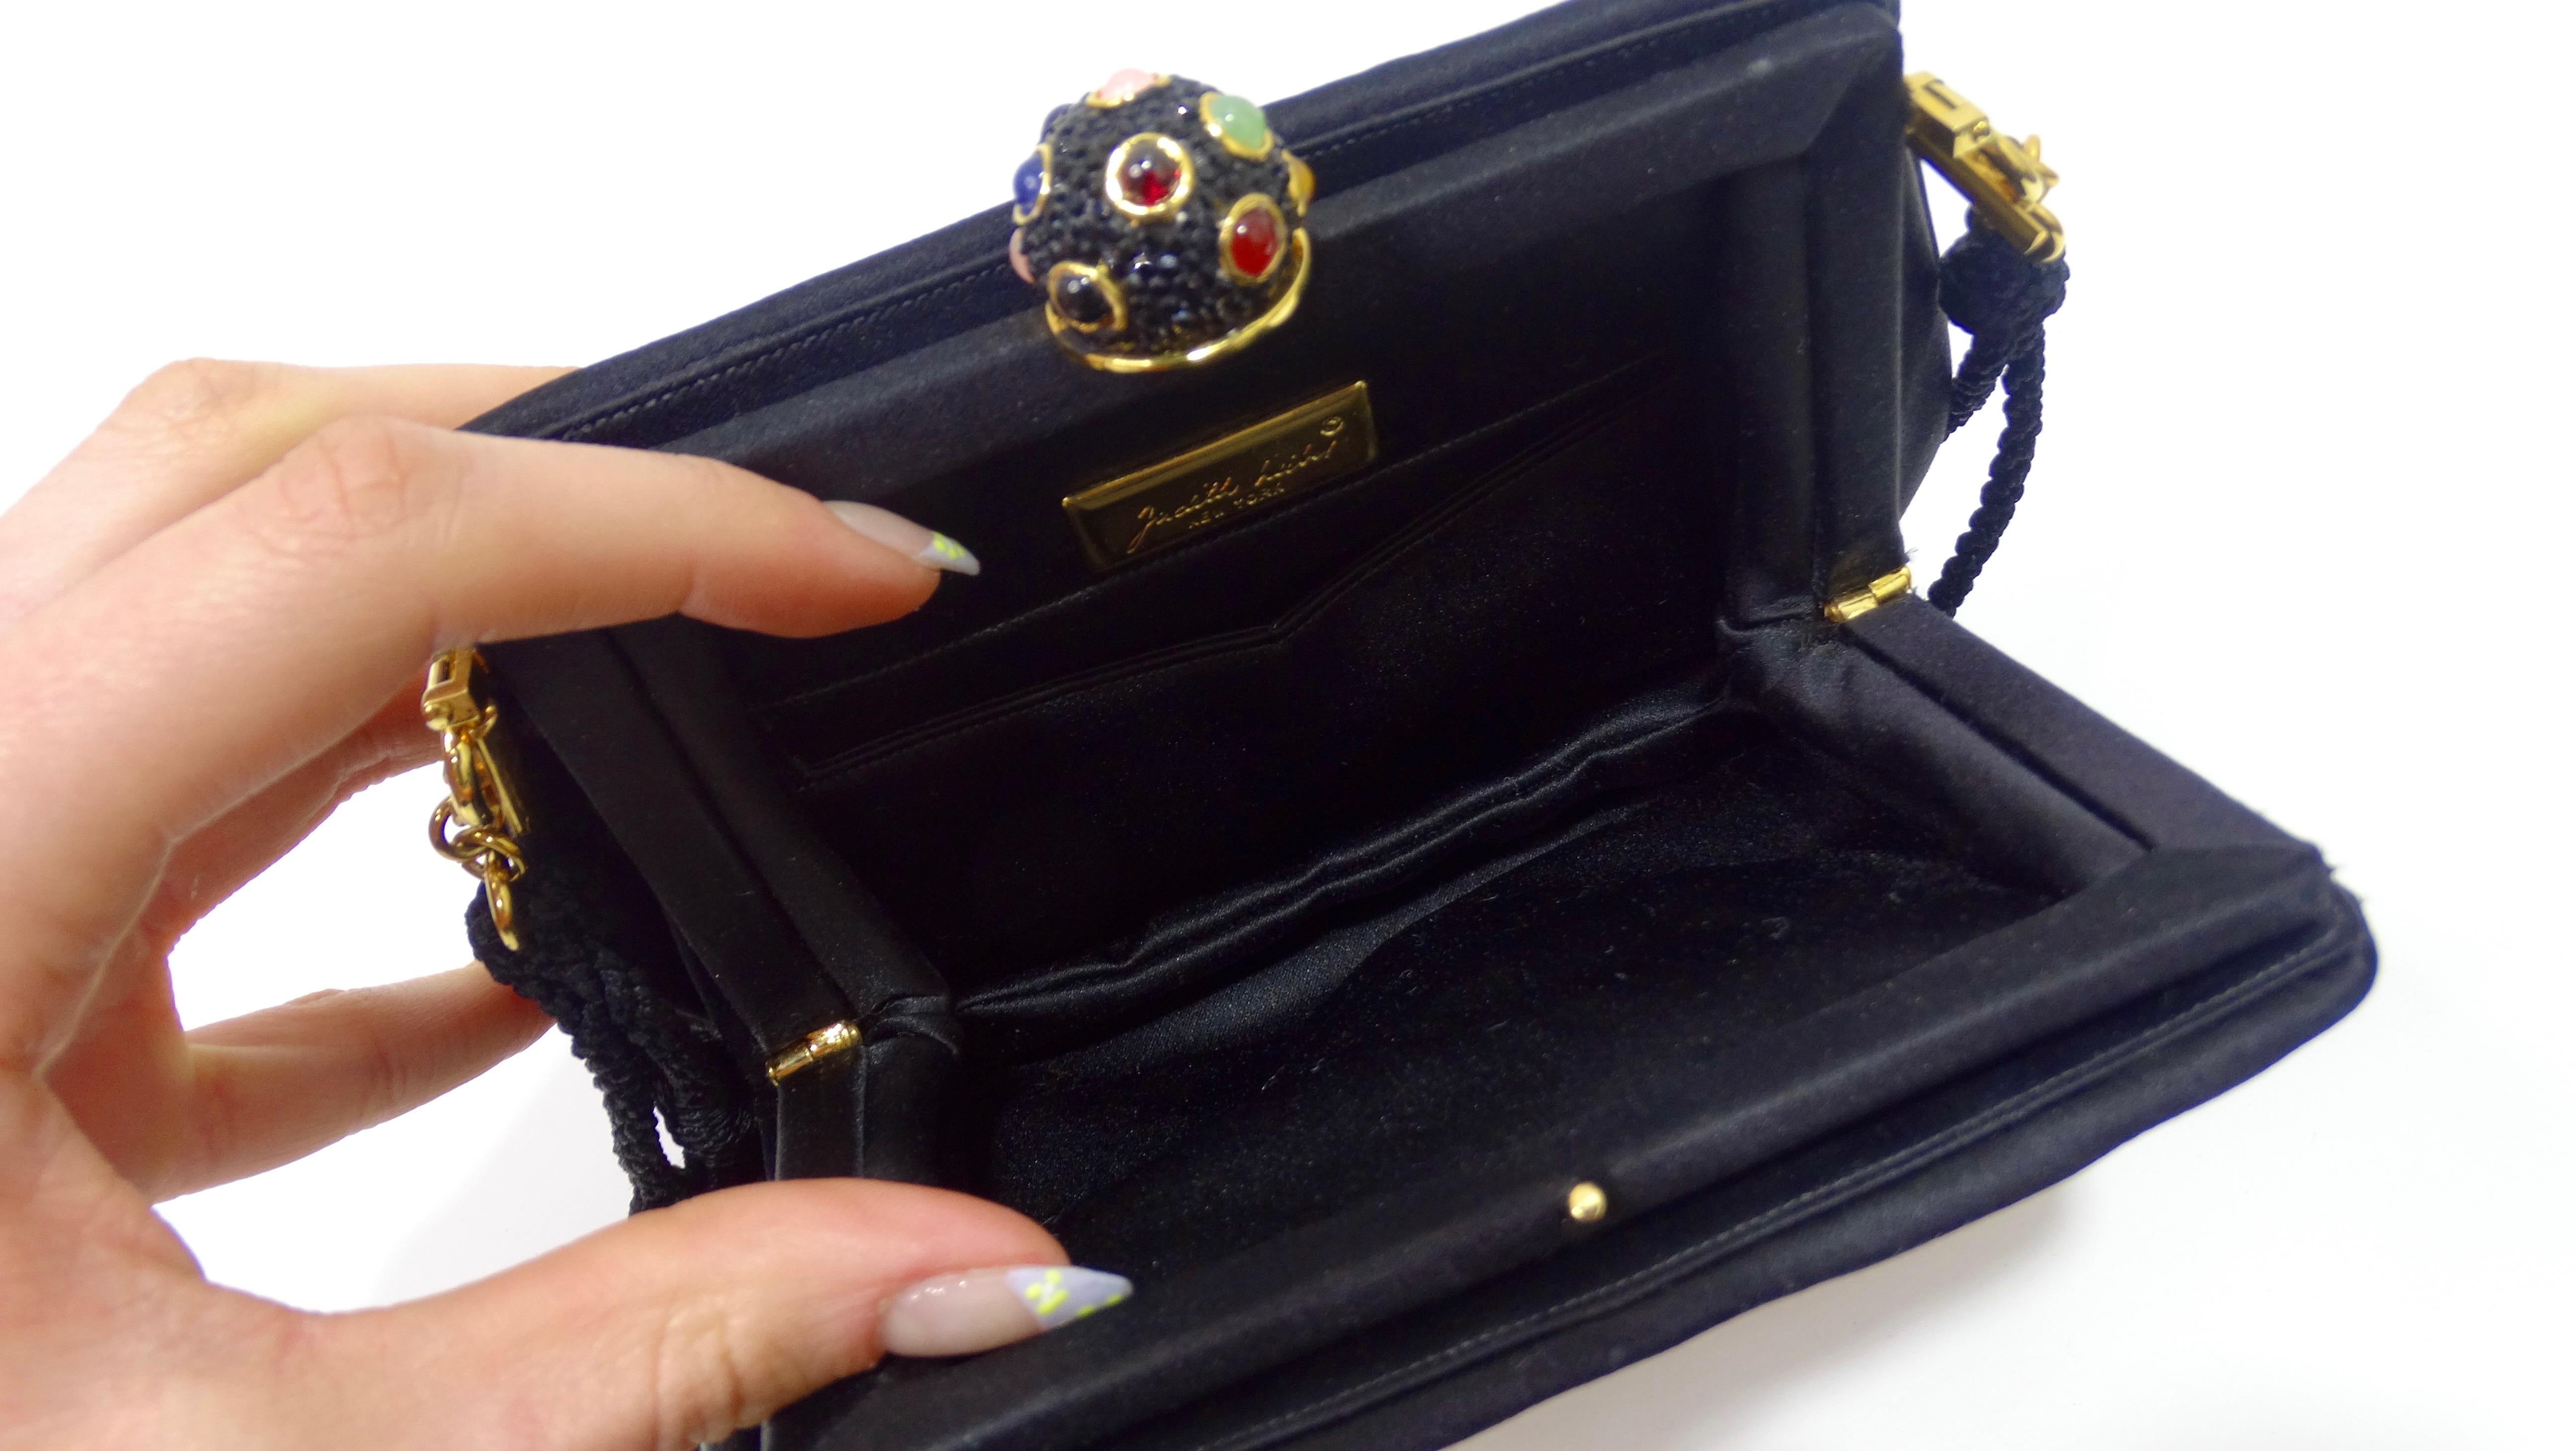 Elevate your look with this amazing Leiber! Circa 1970s, this bag features a gorgeous patchwork motif with colorful rhinestone embellishing, a removable black rope shoulder strap, and a cabochon top closure. Interior is lined with black satin and